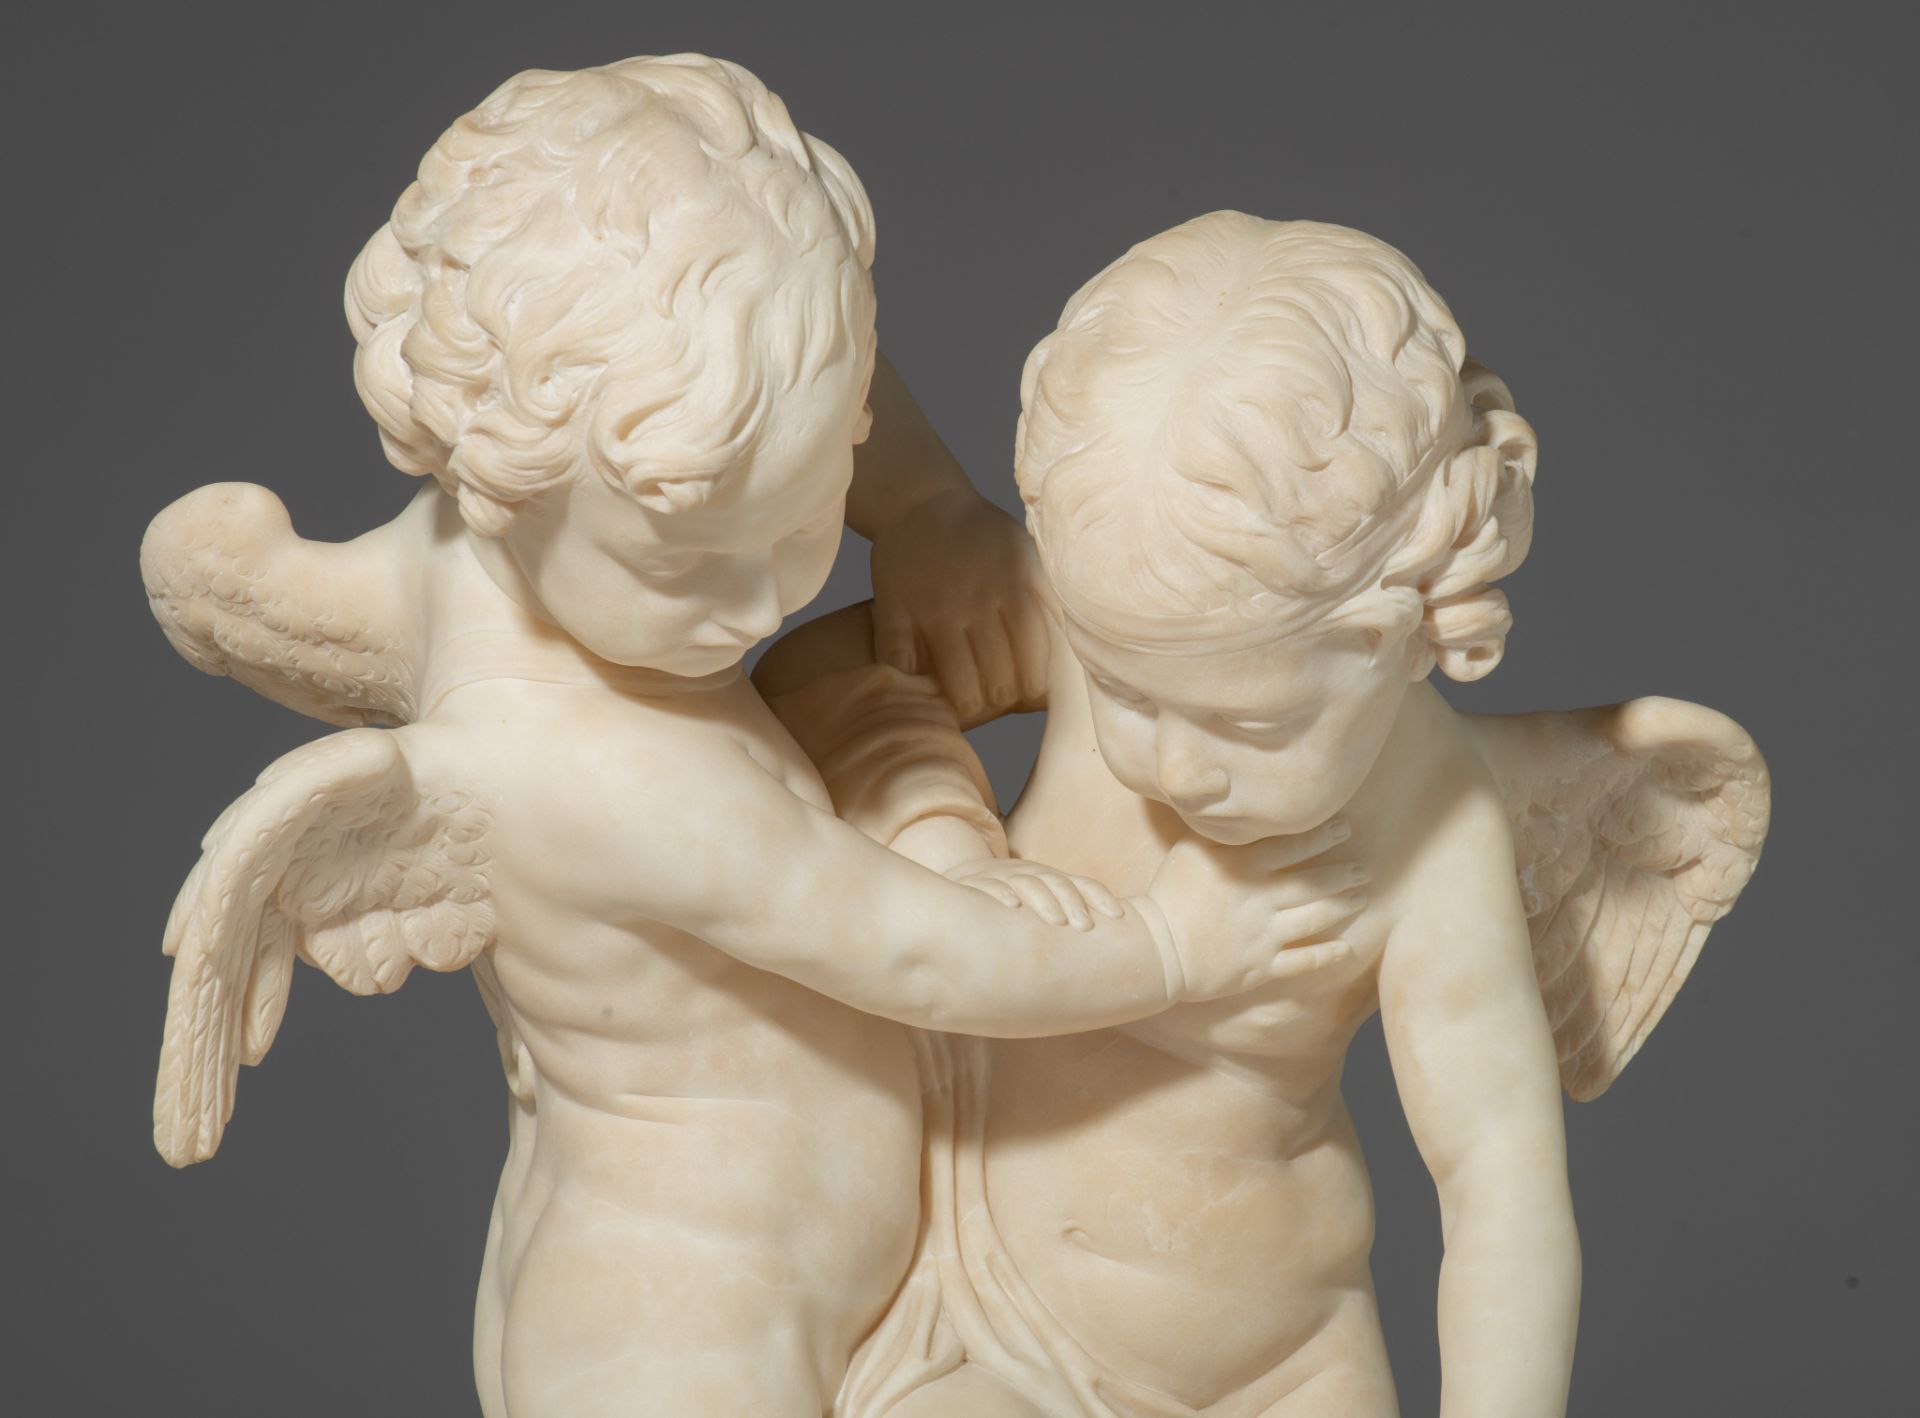 After Etienne Maurice Falconet (1716-1791), 'Bataille d'Amour', Carrara marble, H 70 - W 48 cm - Image 9 of 10